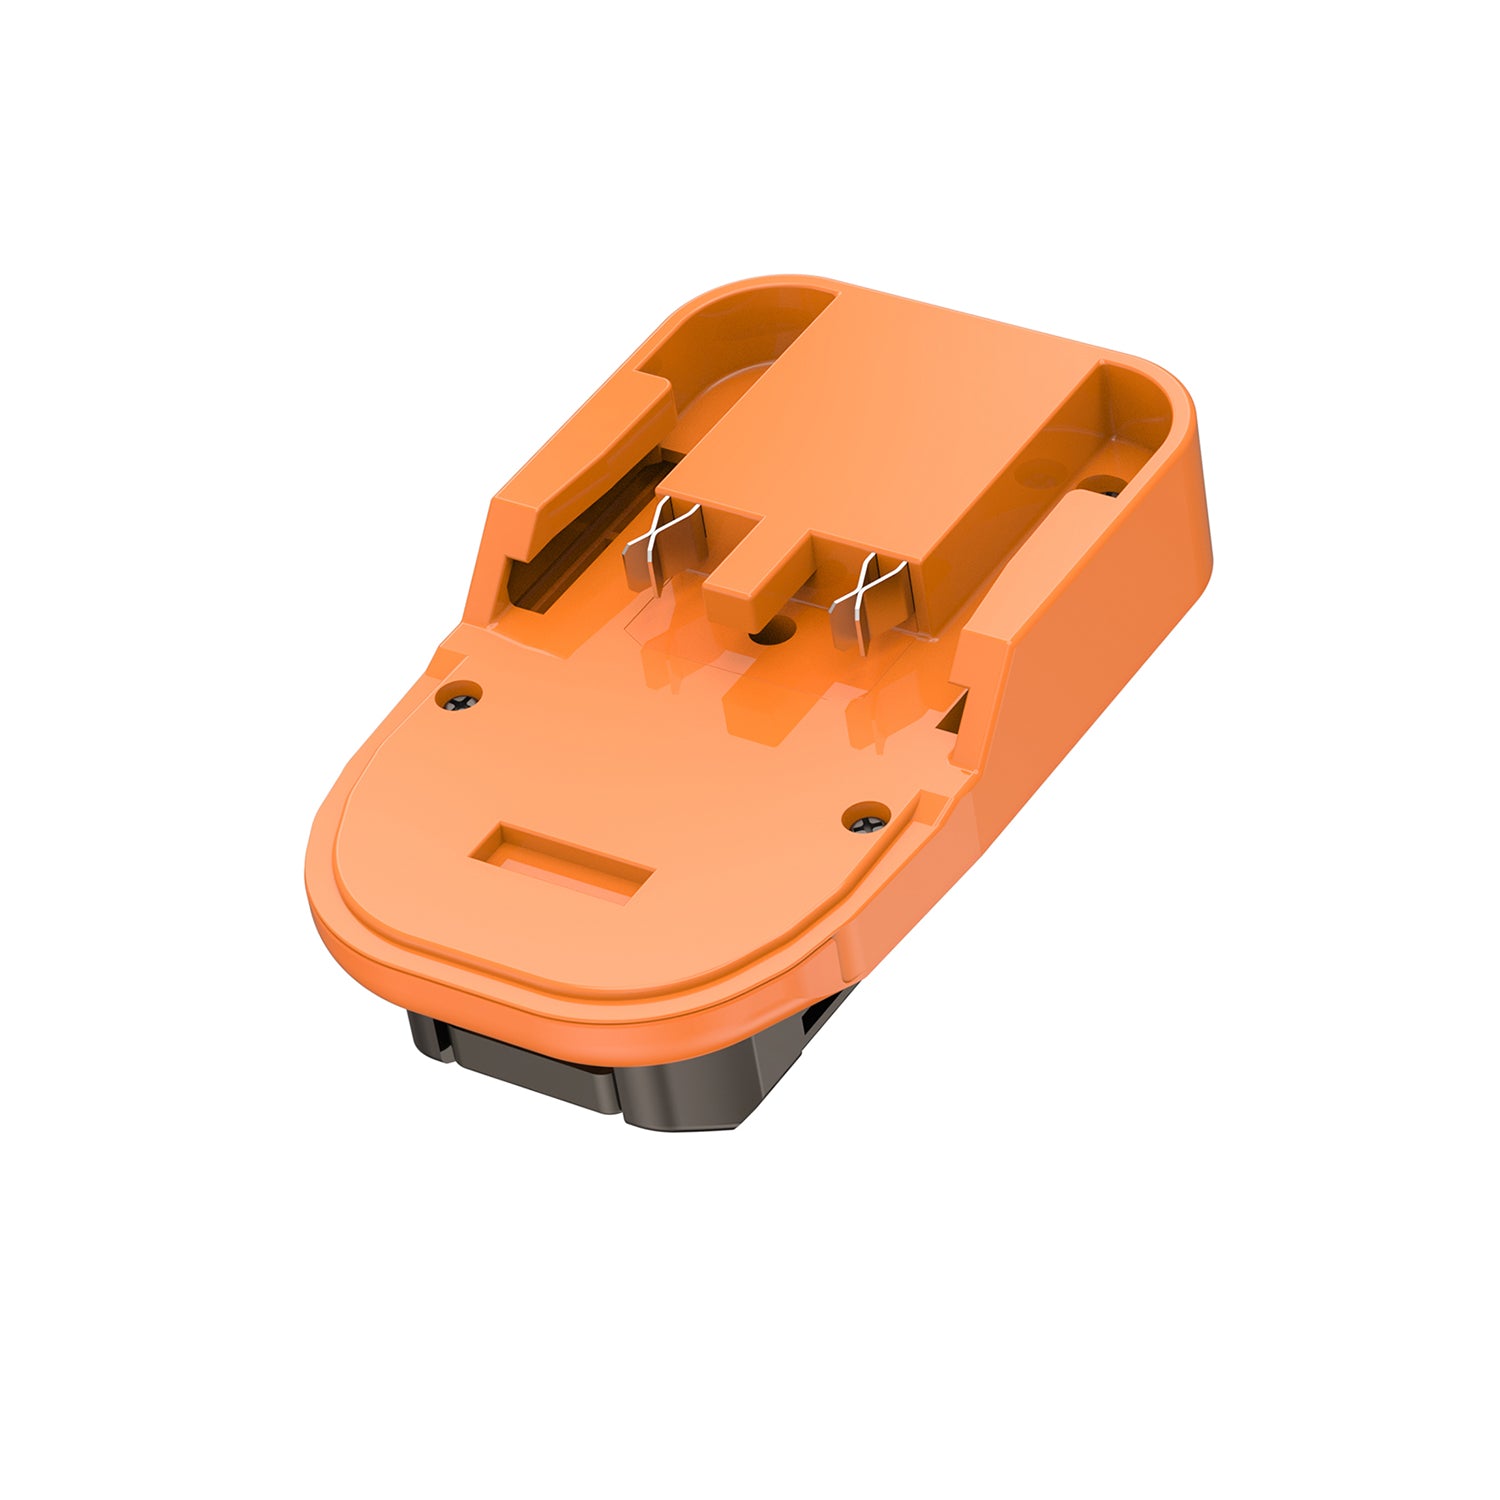 RIDGID Battery Adapter to Black and Decker